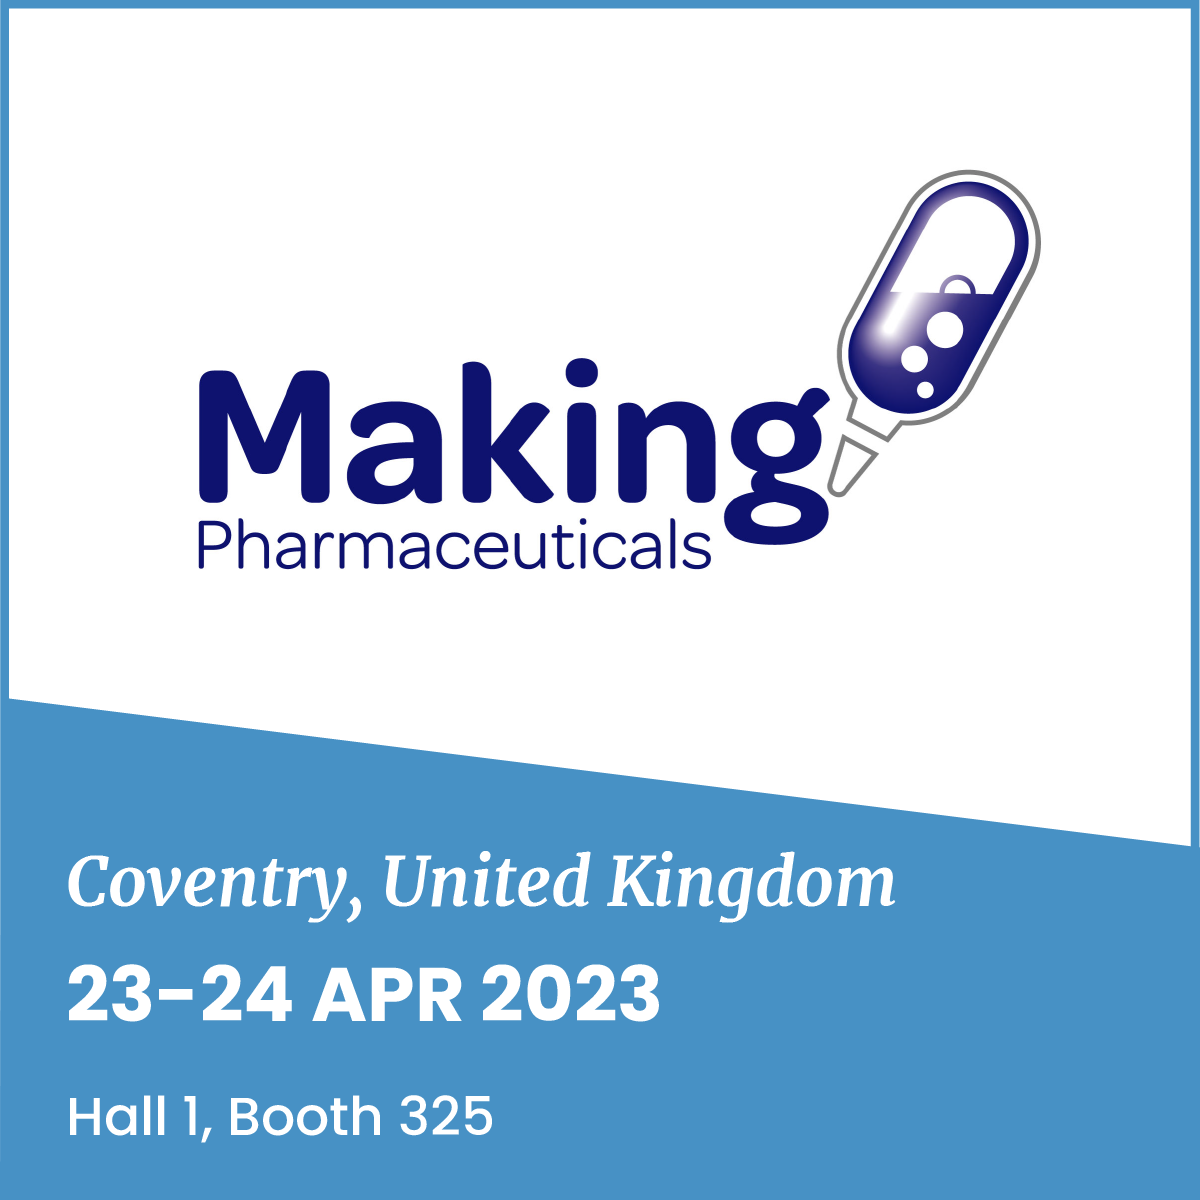 Teaser of the Making Pharmaceuticals event, from 23rd to 24th April, 2024. Hall 1, Booth 325